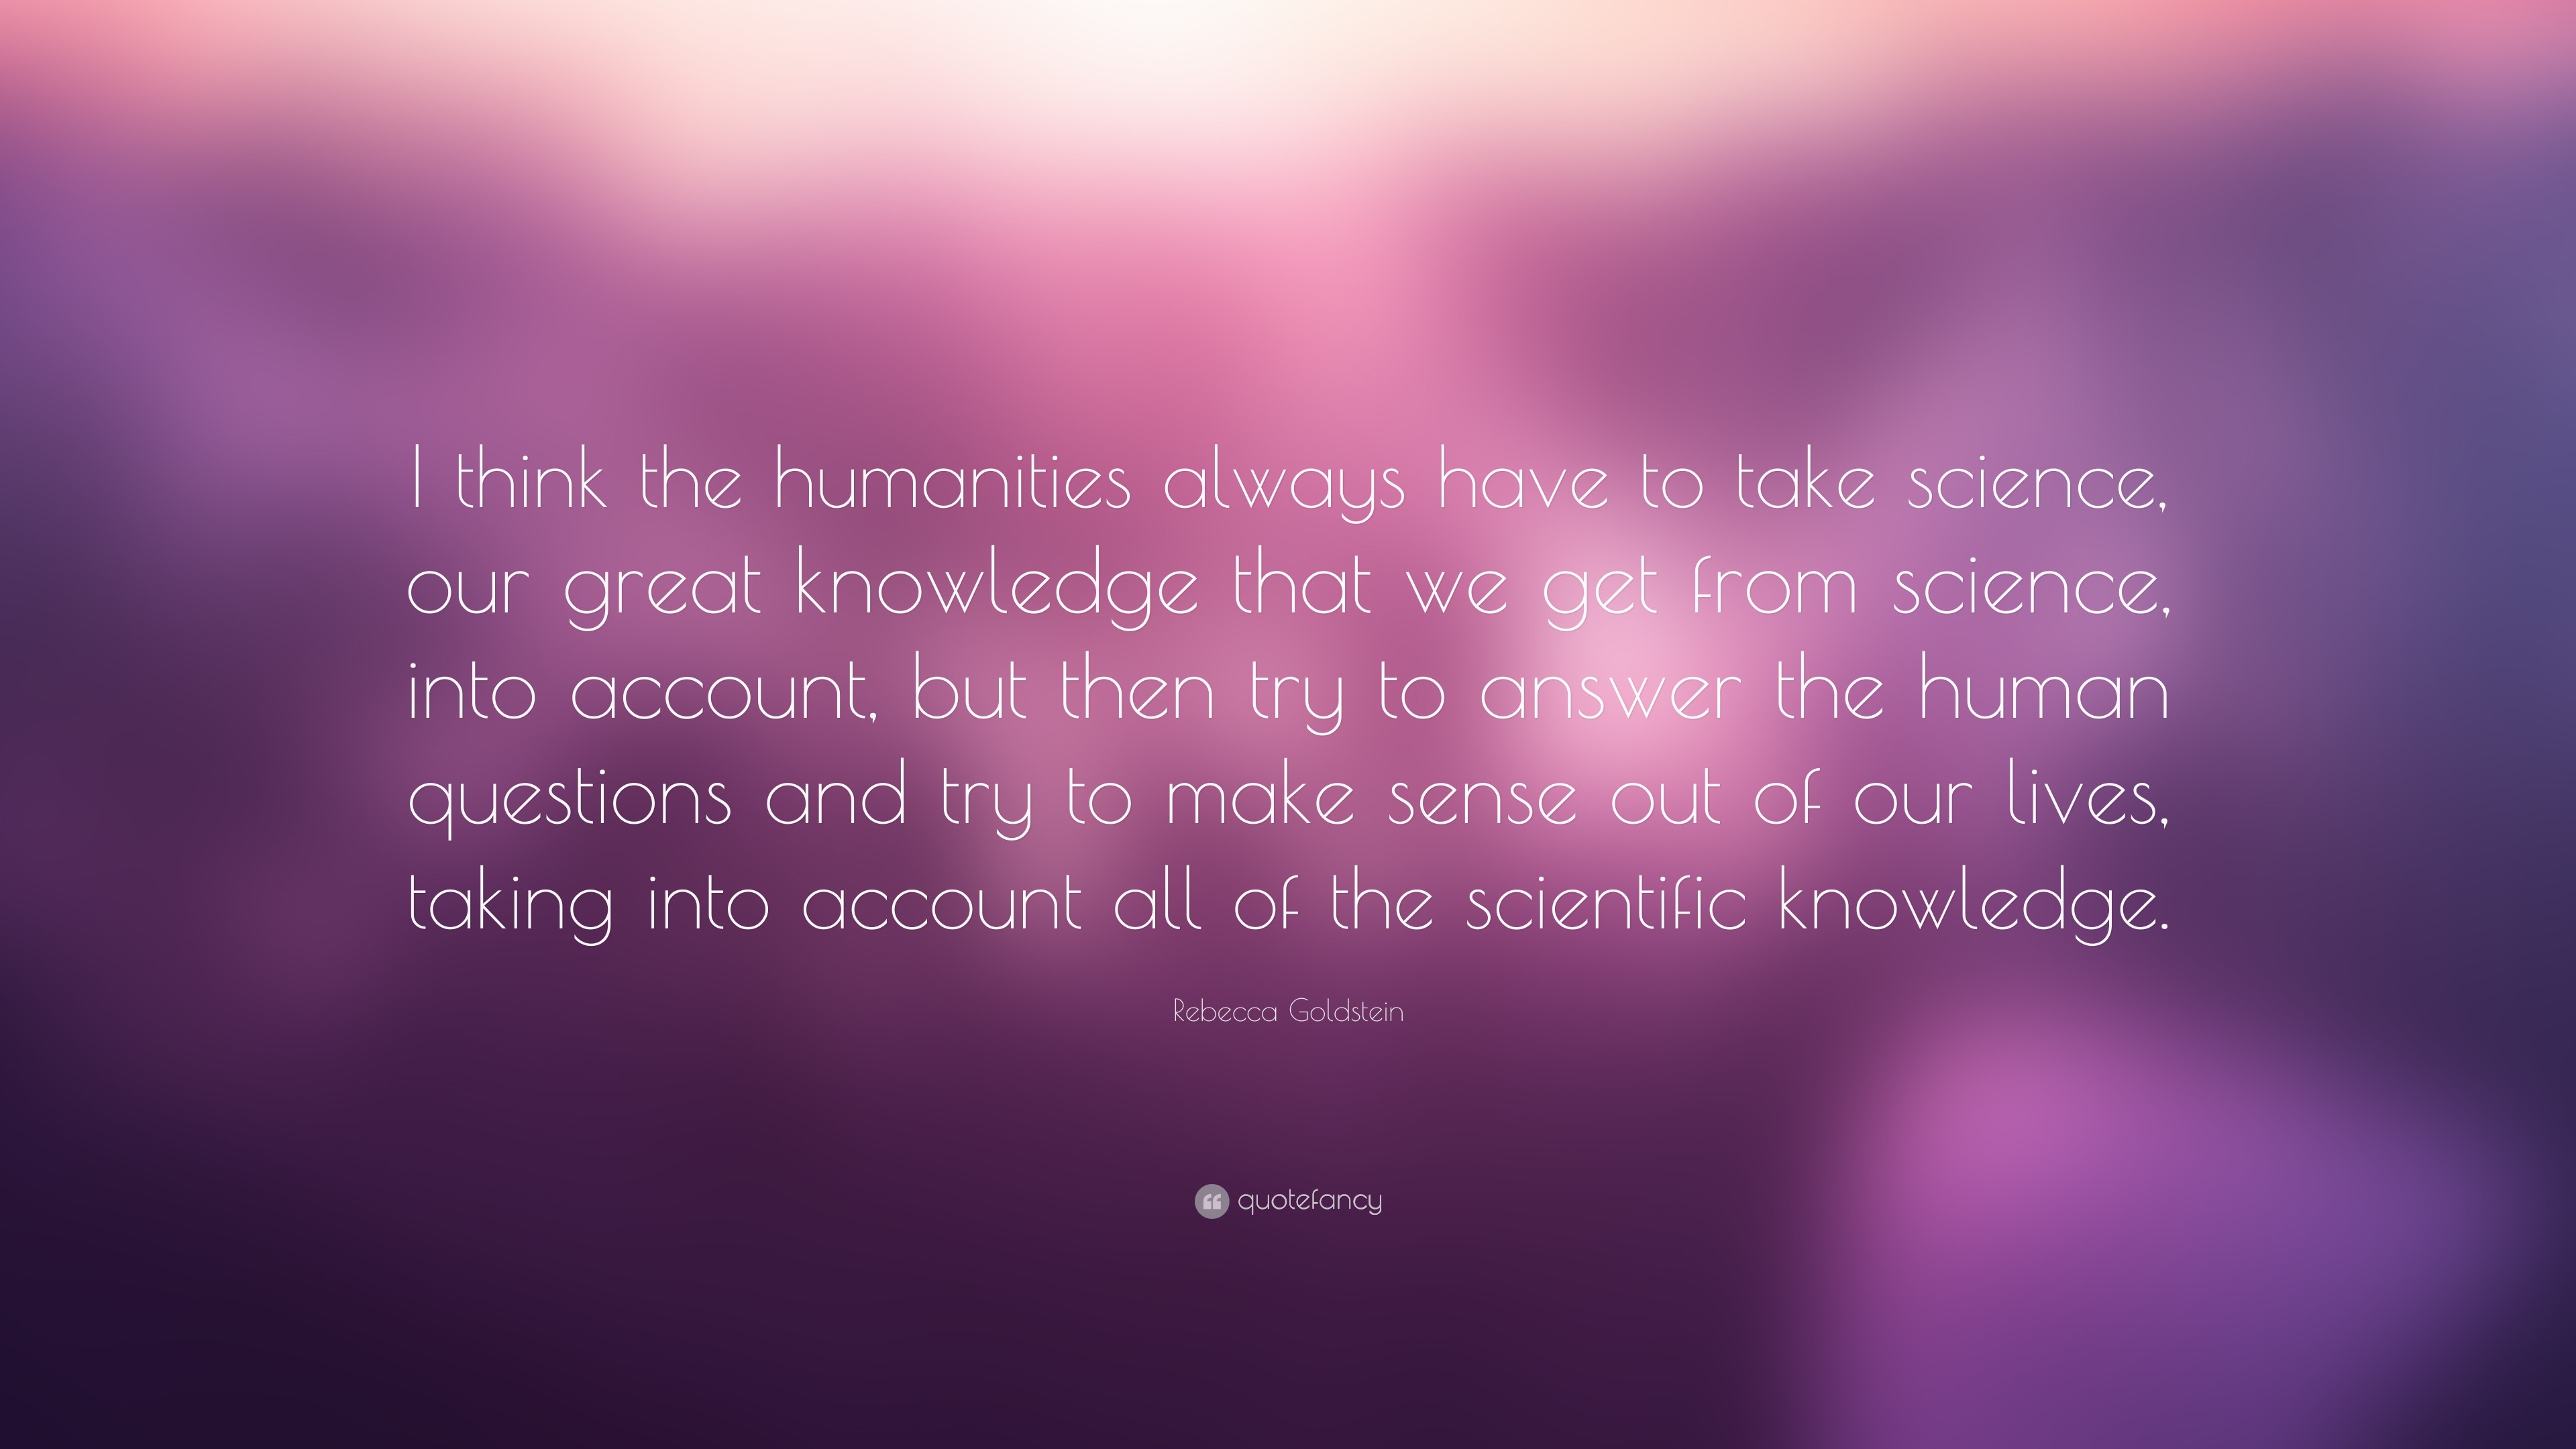 science is better than humanities